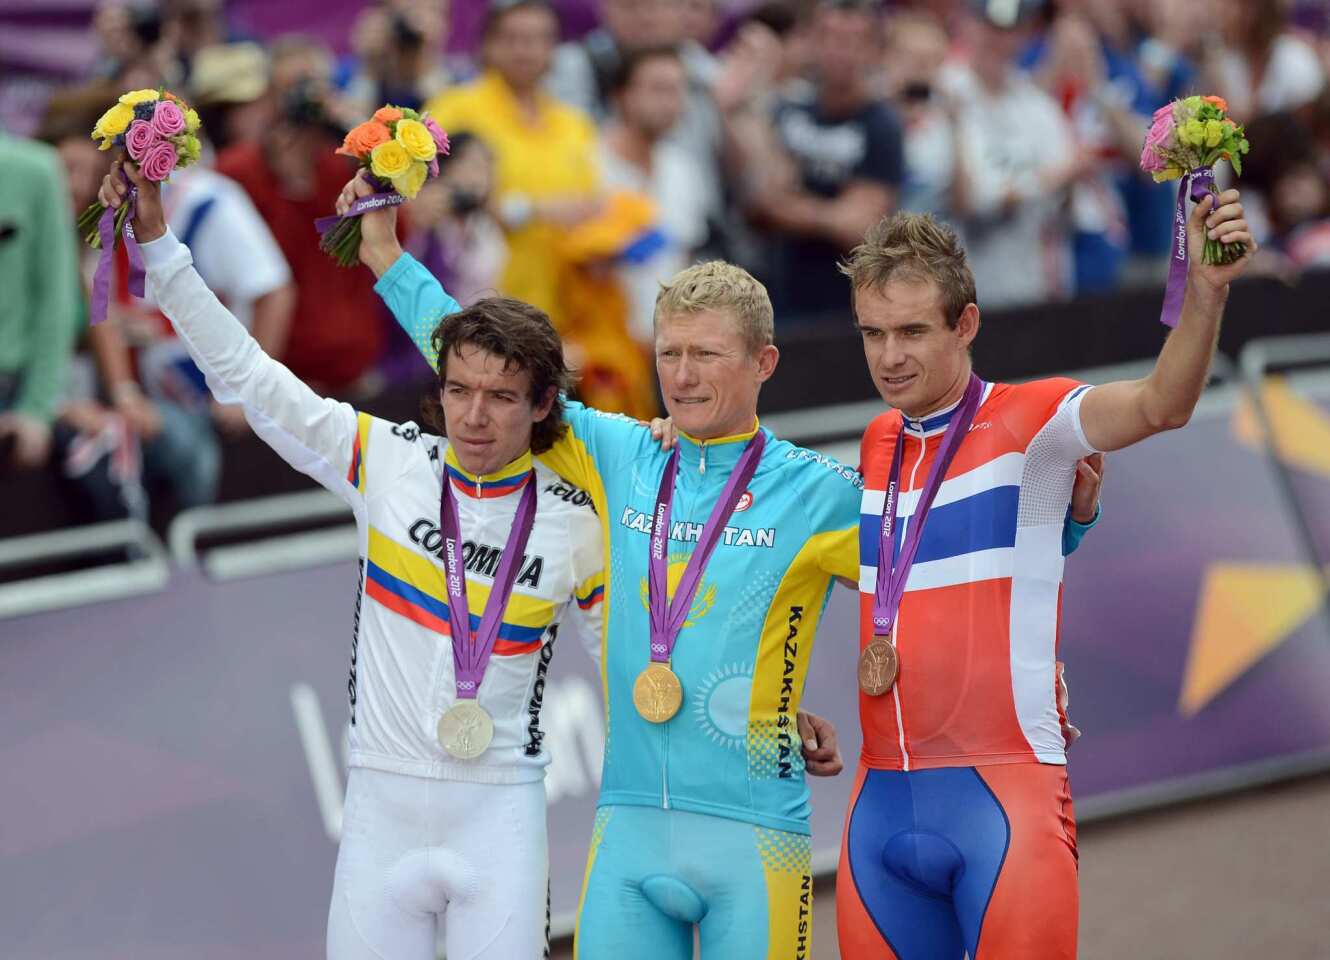 Road race medalists